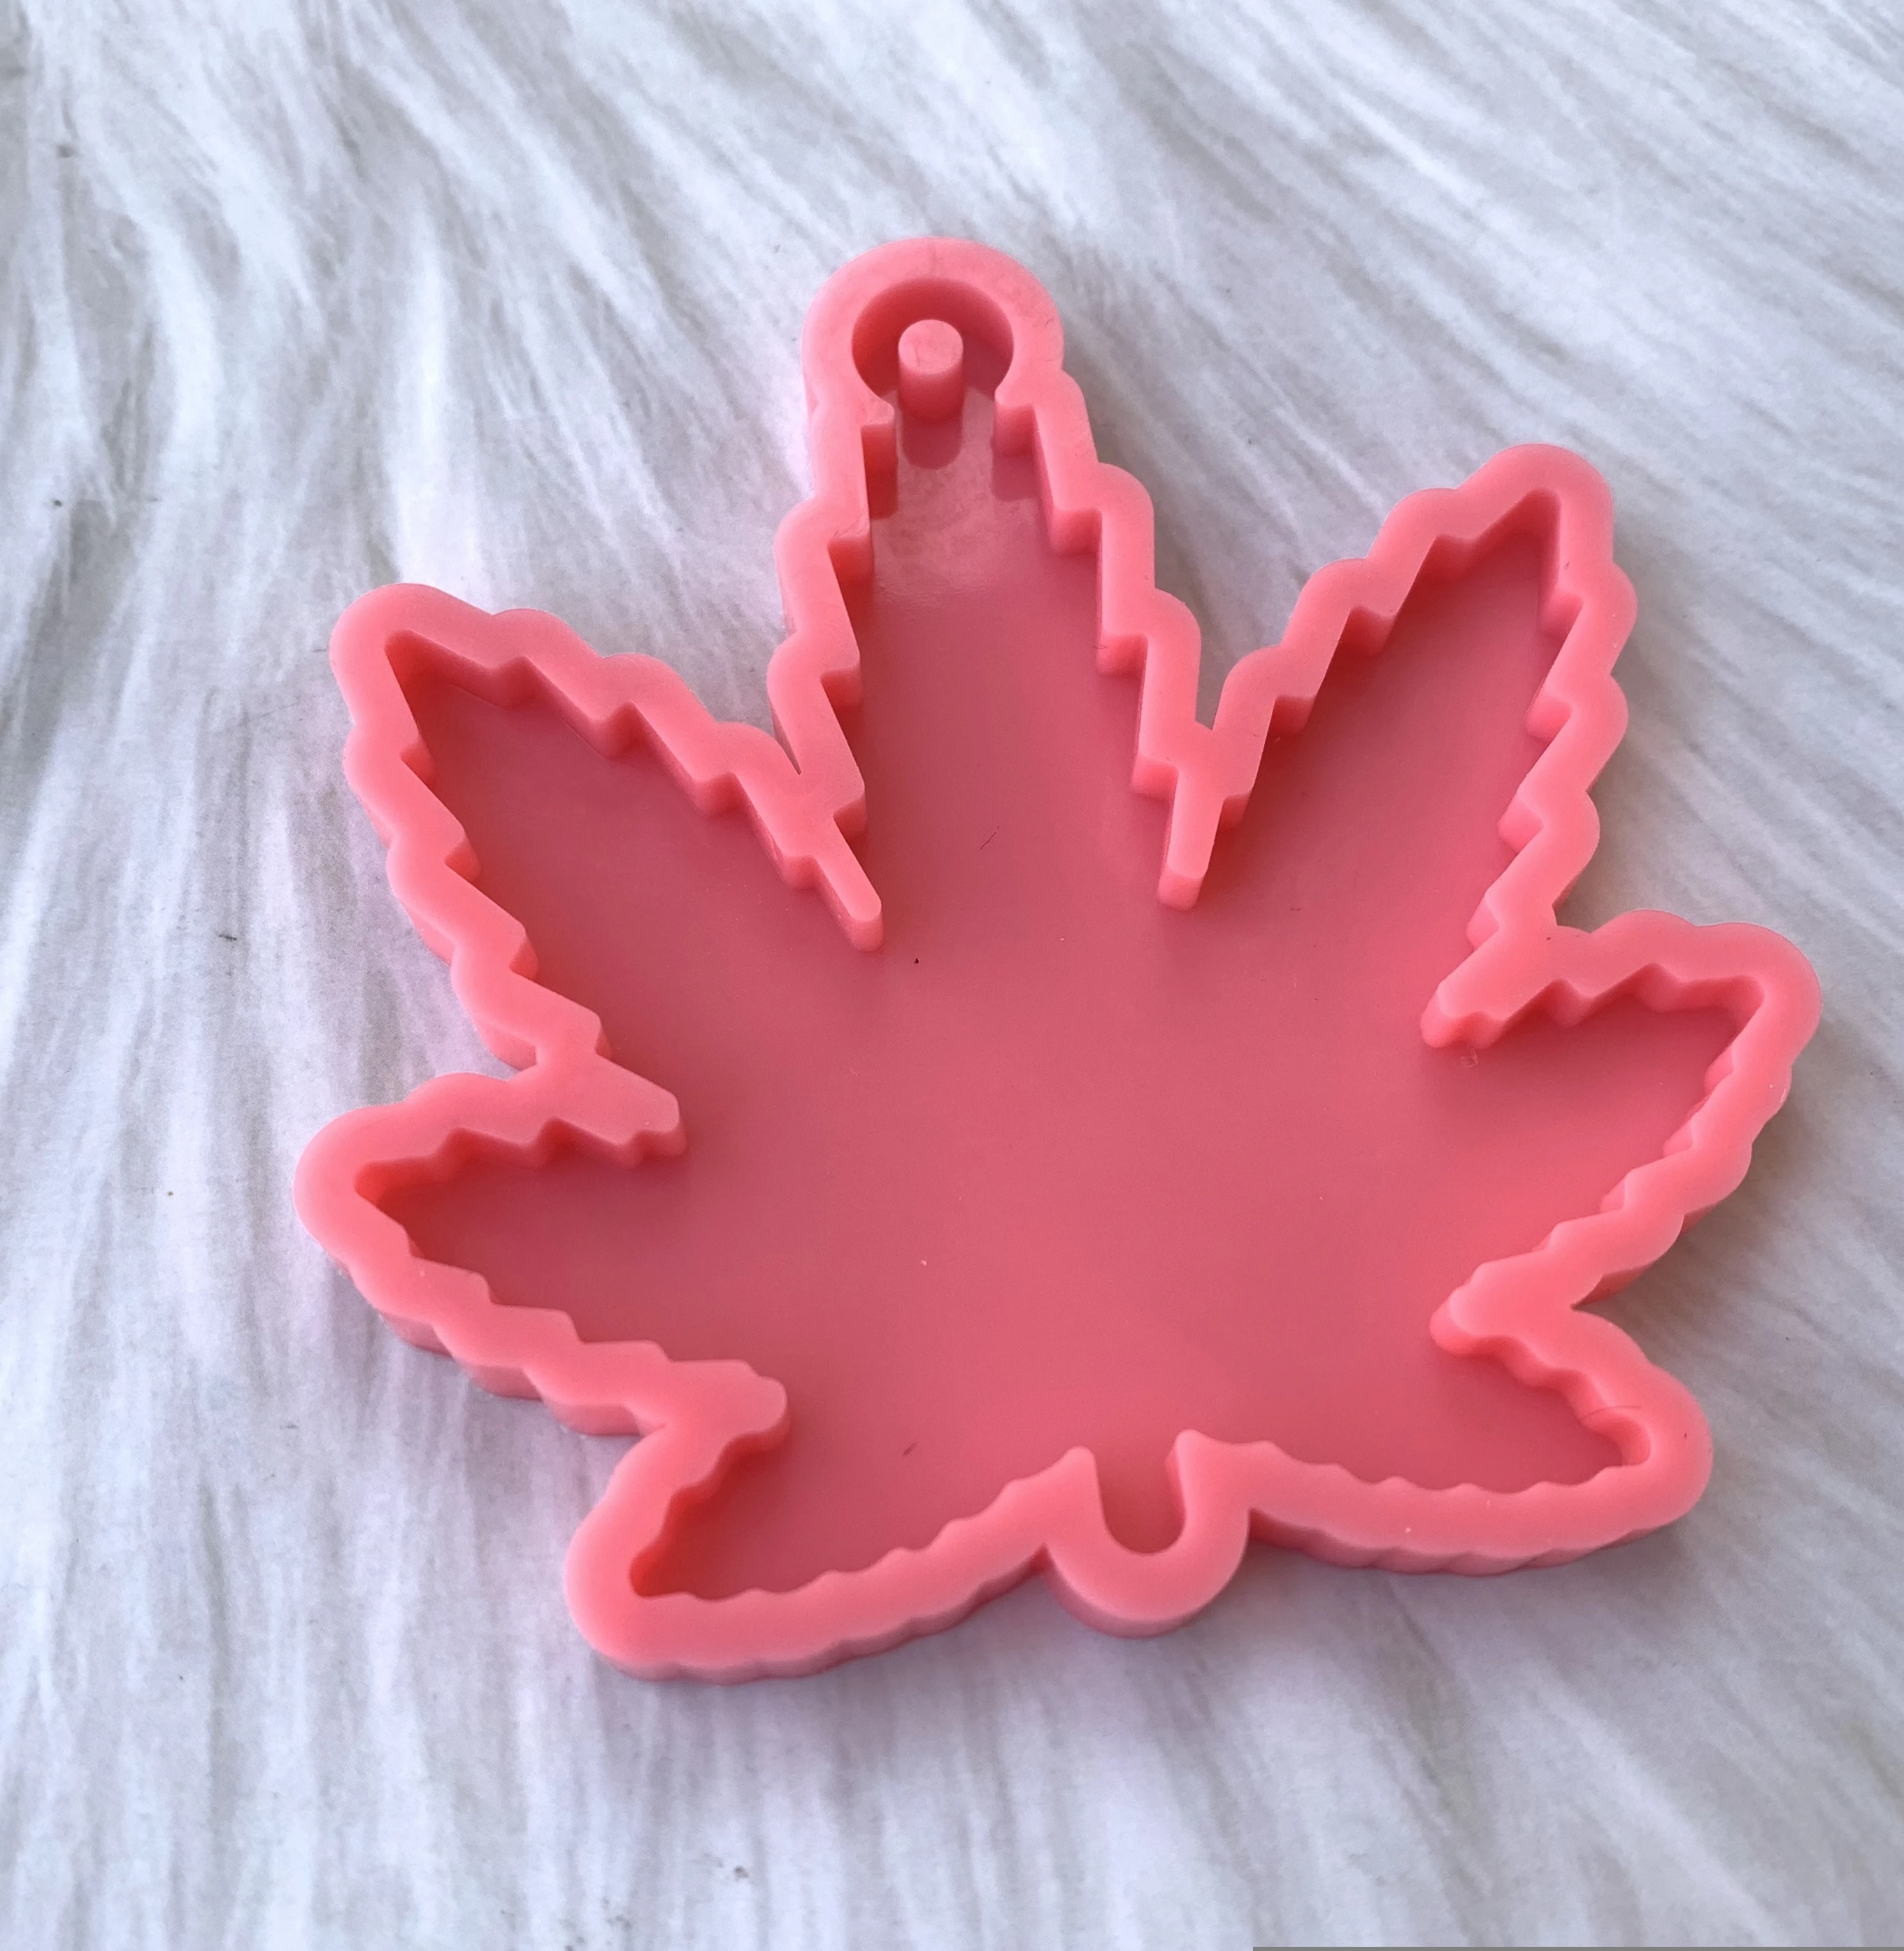 Best selling new design silicone keychain mould silicone weed leaf key ring mold